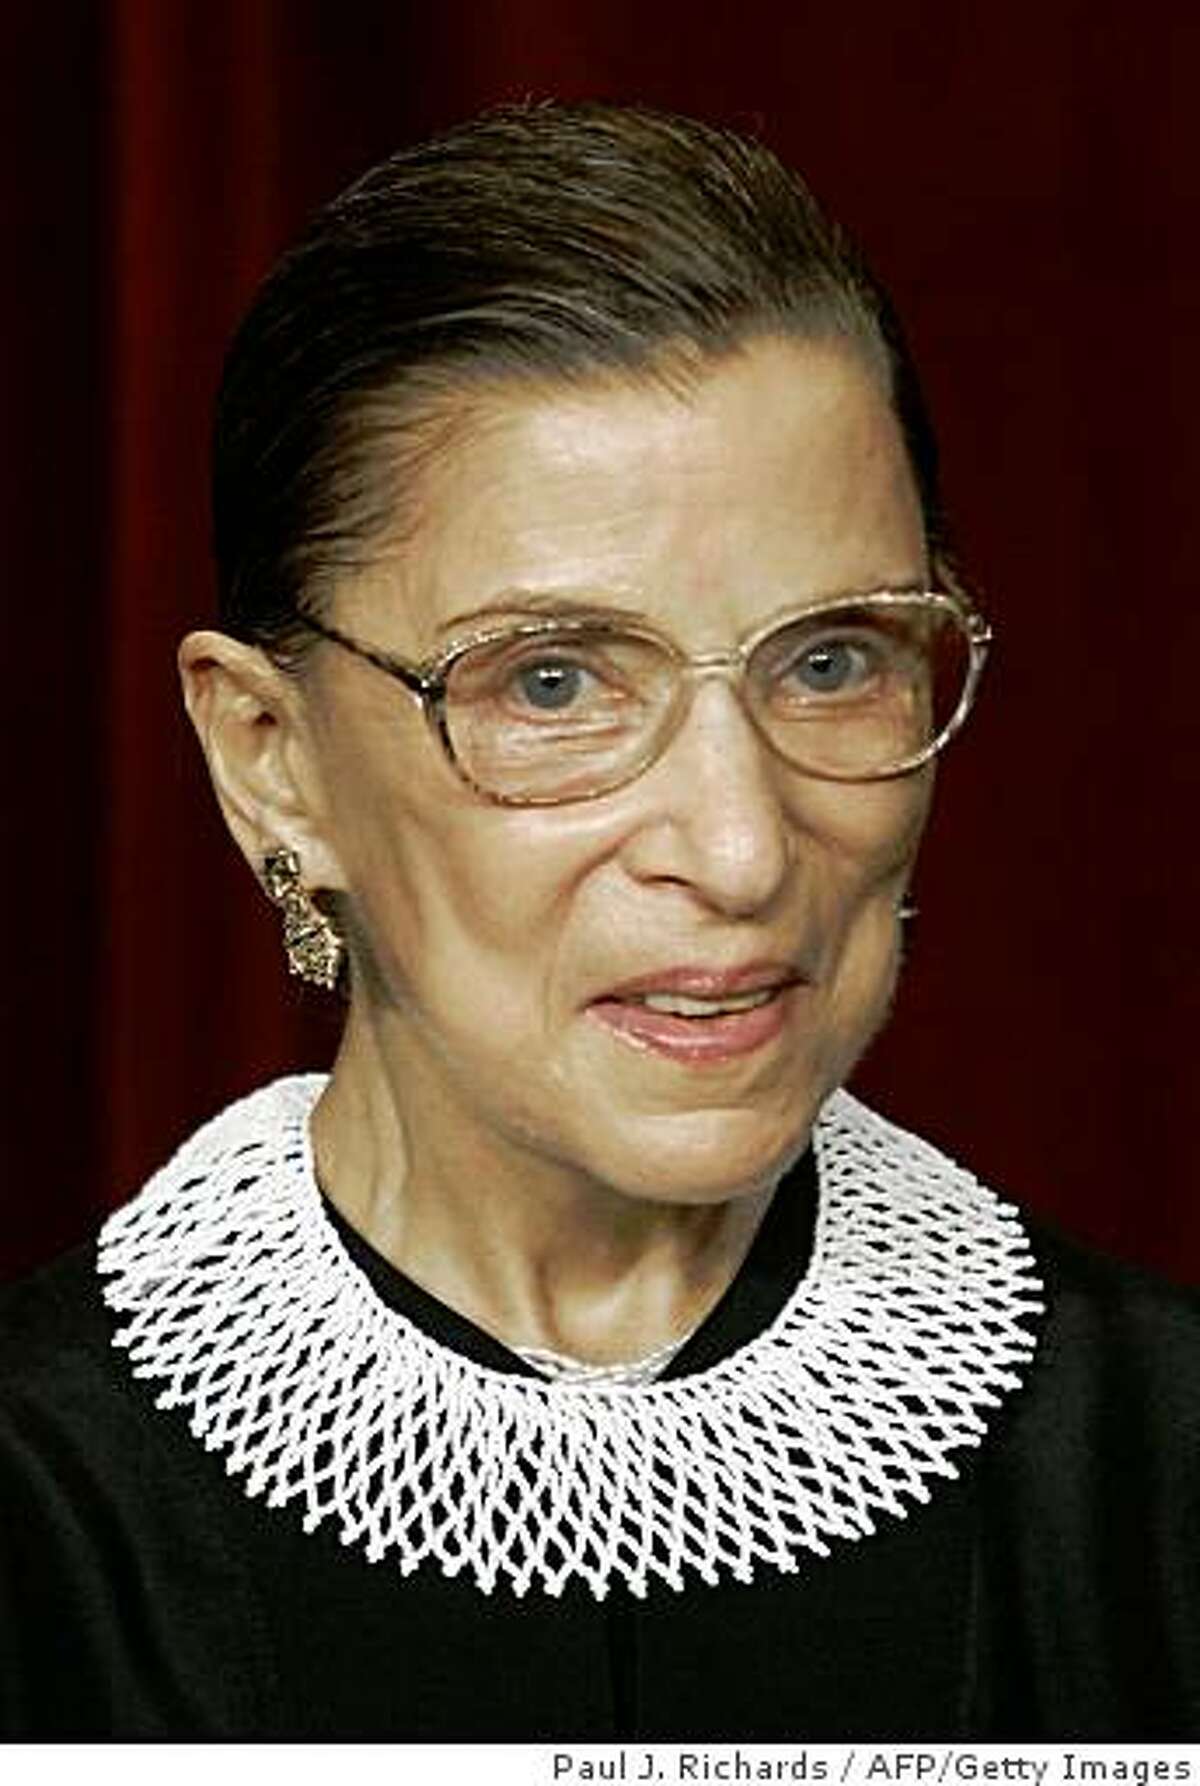 (FILES) US Supreme Court Justice Ruth Bader Ginsburg poses in this March 3, 2006 file photo inside the Supreme Court in Washington, DC. The only woman among the nine justices of the US Supreme Court, Ruth Bader Ginsburg, said on March 17, 2009 she plans to keep working but faces chemotherapy after successful surgery for pancreatic cancer. Ginsburg, 76, underwent the surgery in early February, but has returned to the bench where she is one of five justices who are now older than 70. She said in a statement Tuesday: "I am scheduled to undergo a precautionary, post-surgery course of chemotherapy at the National Institutes of Health. "The treatments, which will commence in late March, are not expected to affect my schedule at the court." In 1999 Ginsburg underwent surgery for colorectal cancer and returned to work soon afterwards. AFP PHOTO/Paul J. RICHARDS/FILES (Photo credit should read PAUL J. RICHARDS/AFP/Getty Images)